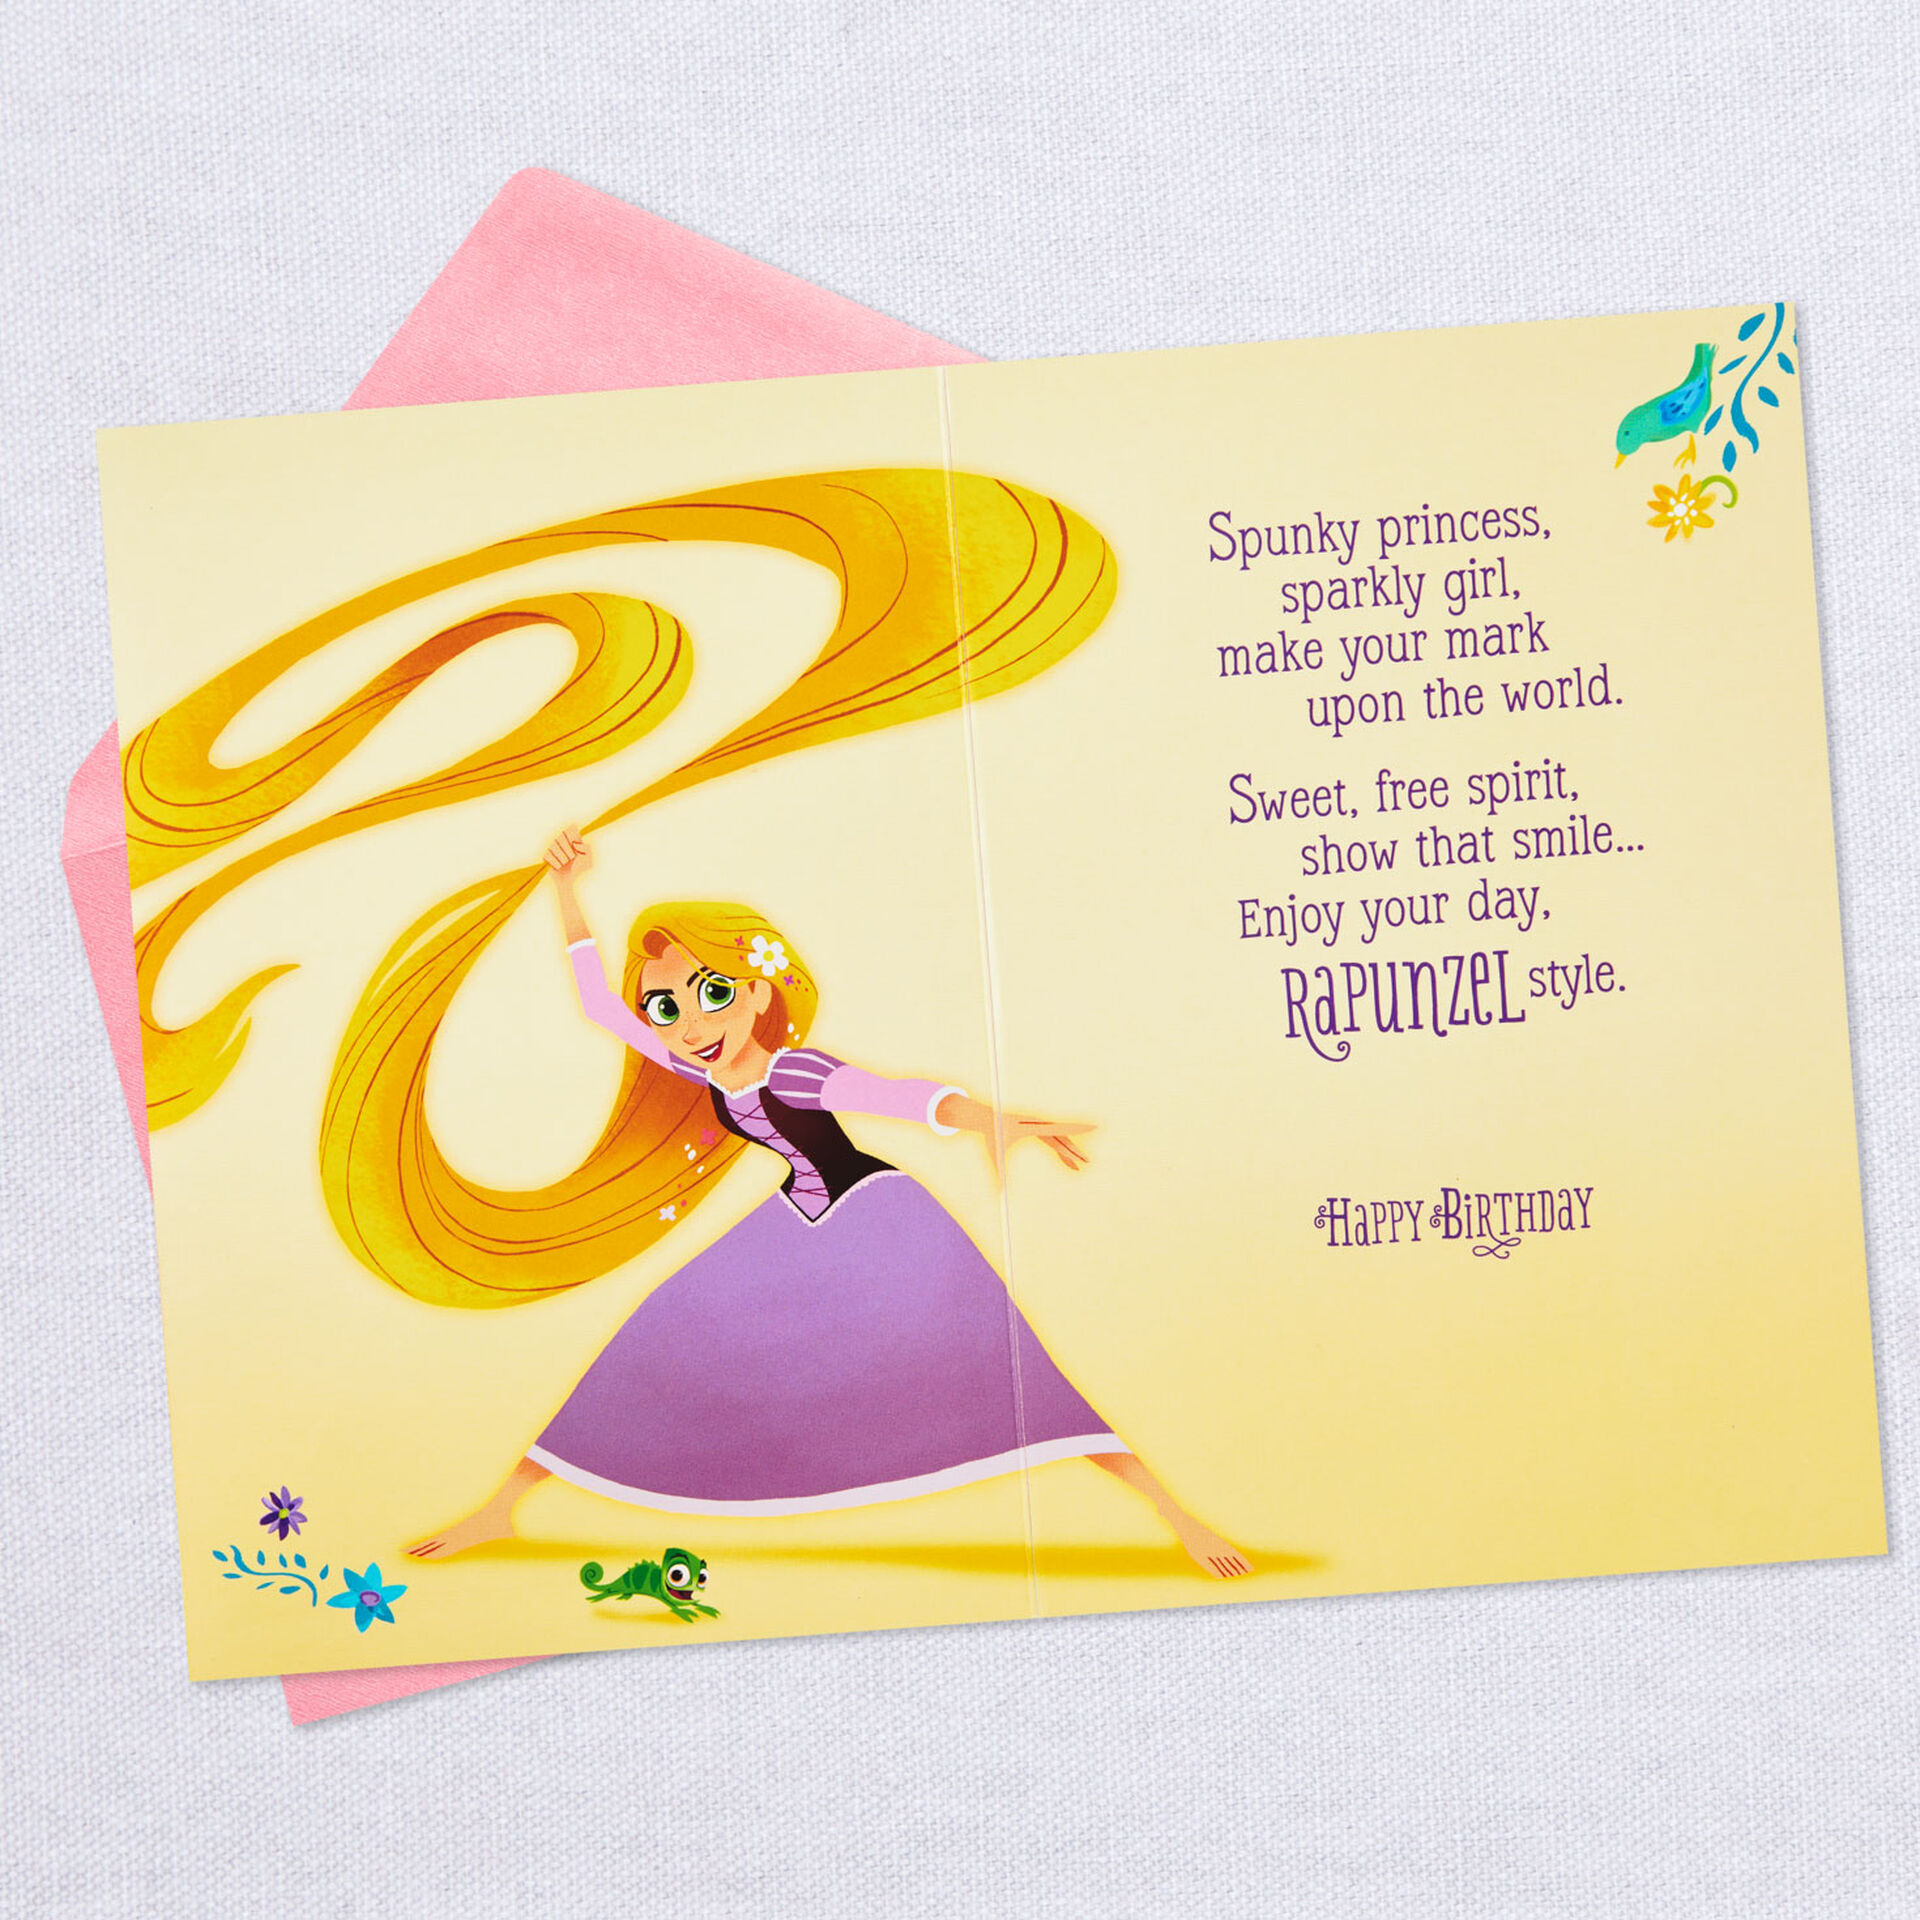 disney-tangled-rapunzel-style-musical-birthday-card-with-light